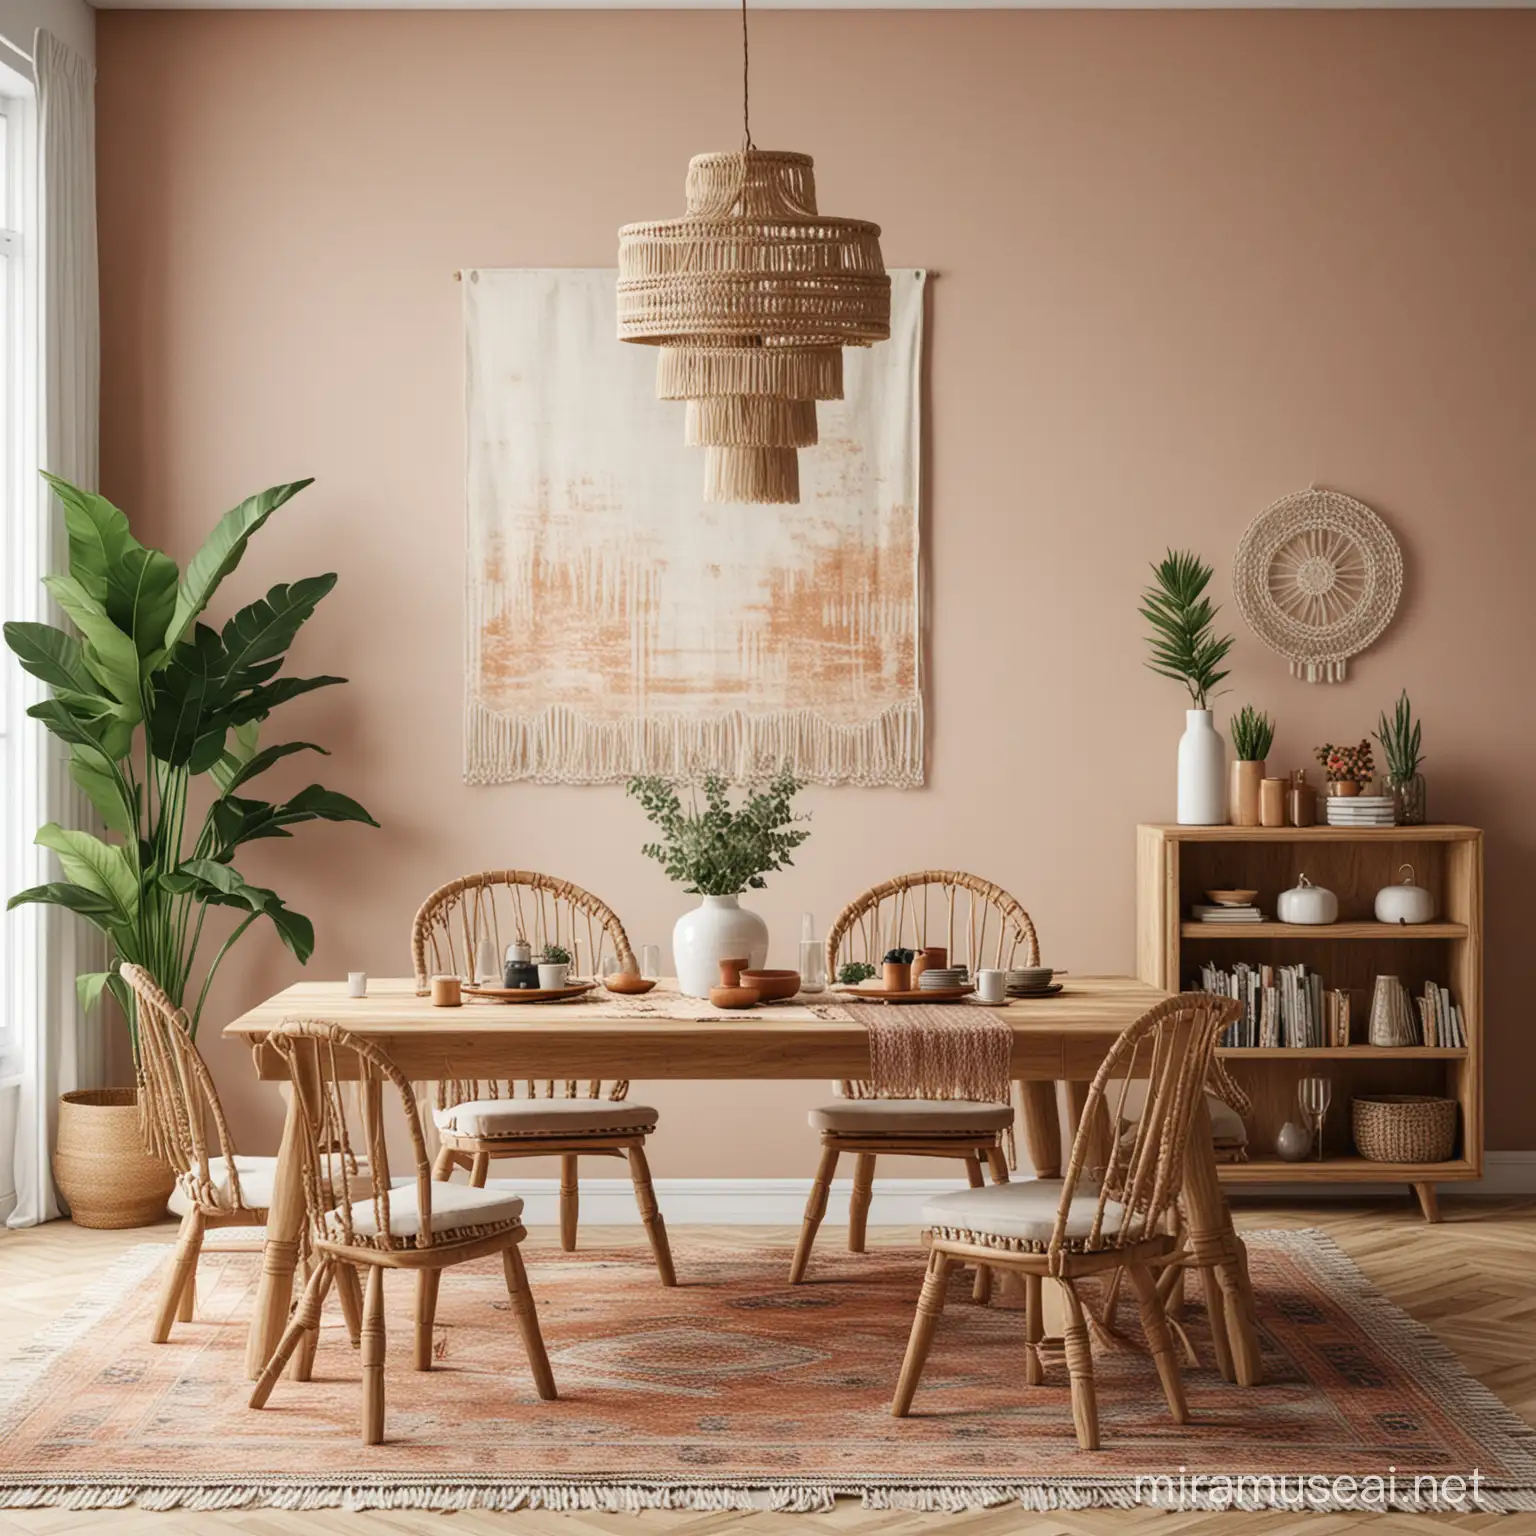 Boho Dining Room Mockup with Vibrant Textures and Eclectic Decor